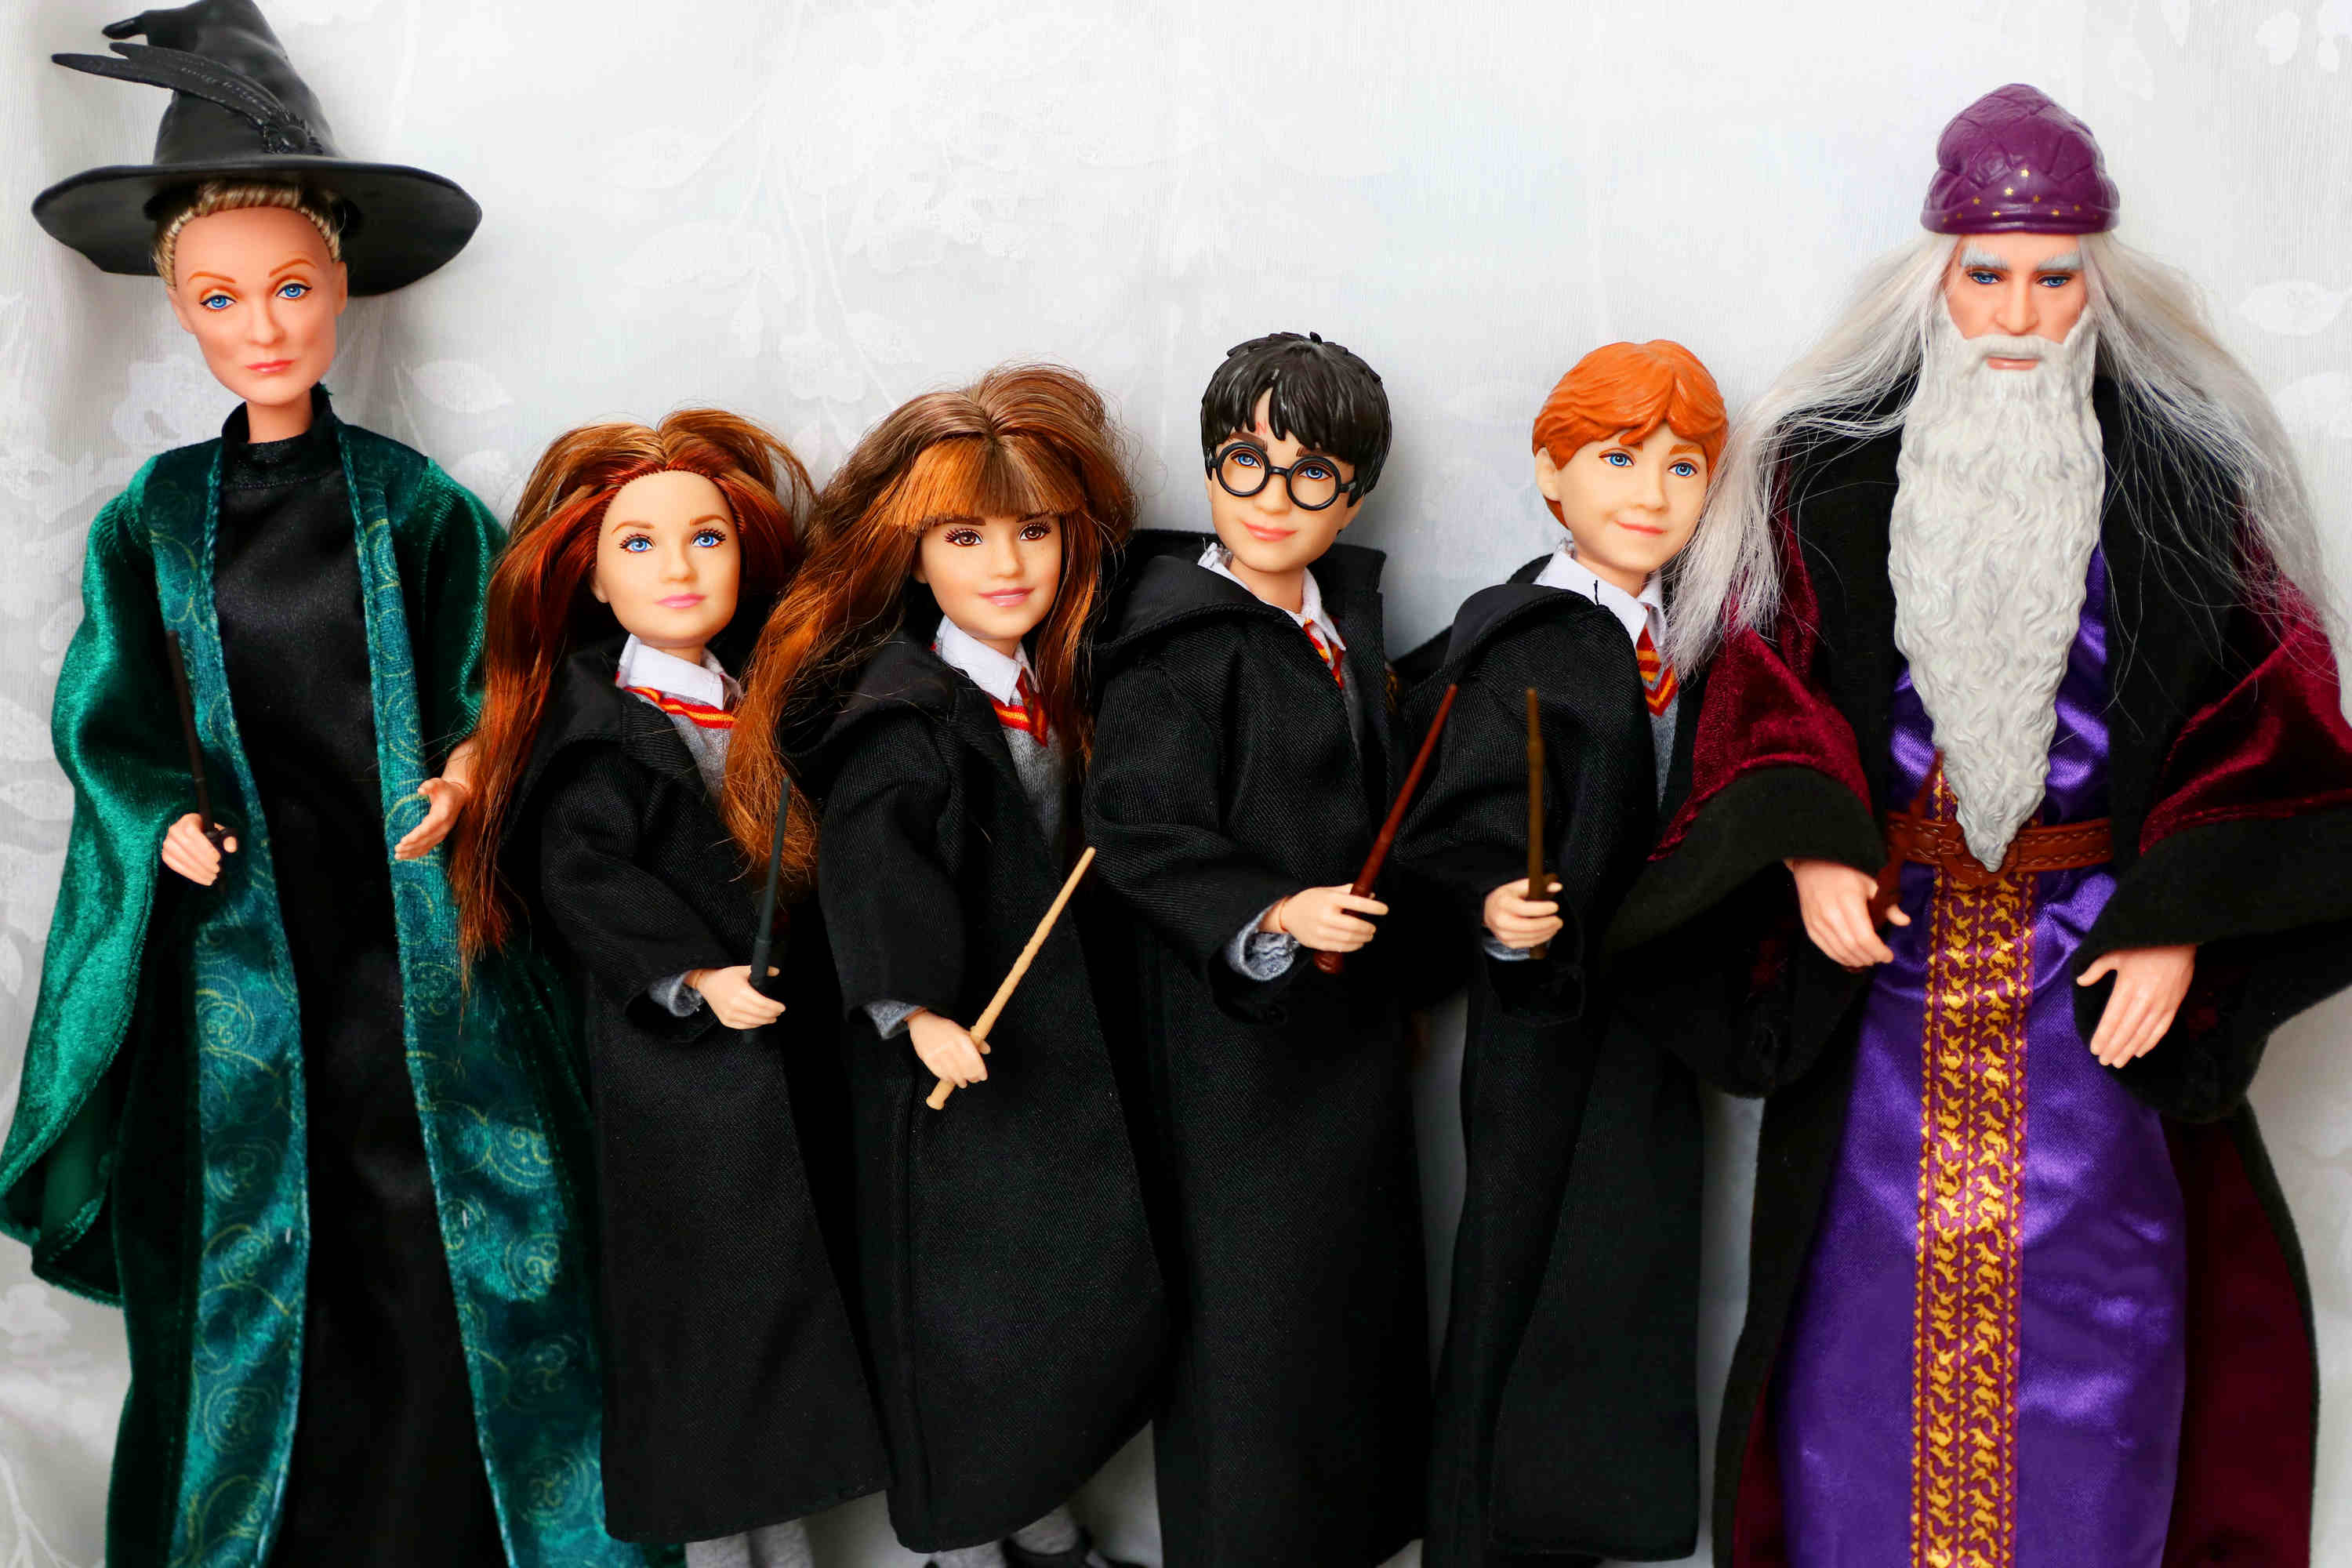 harry potter doll collection